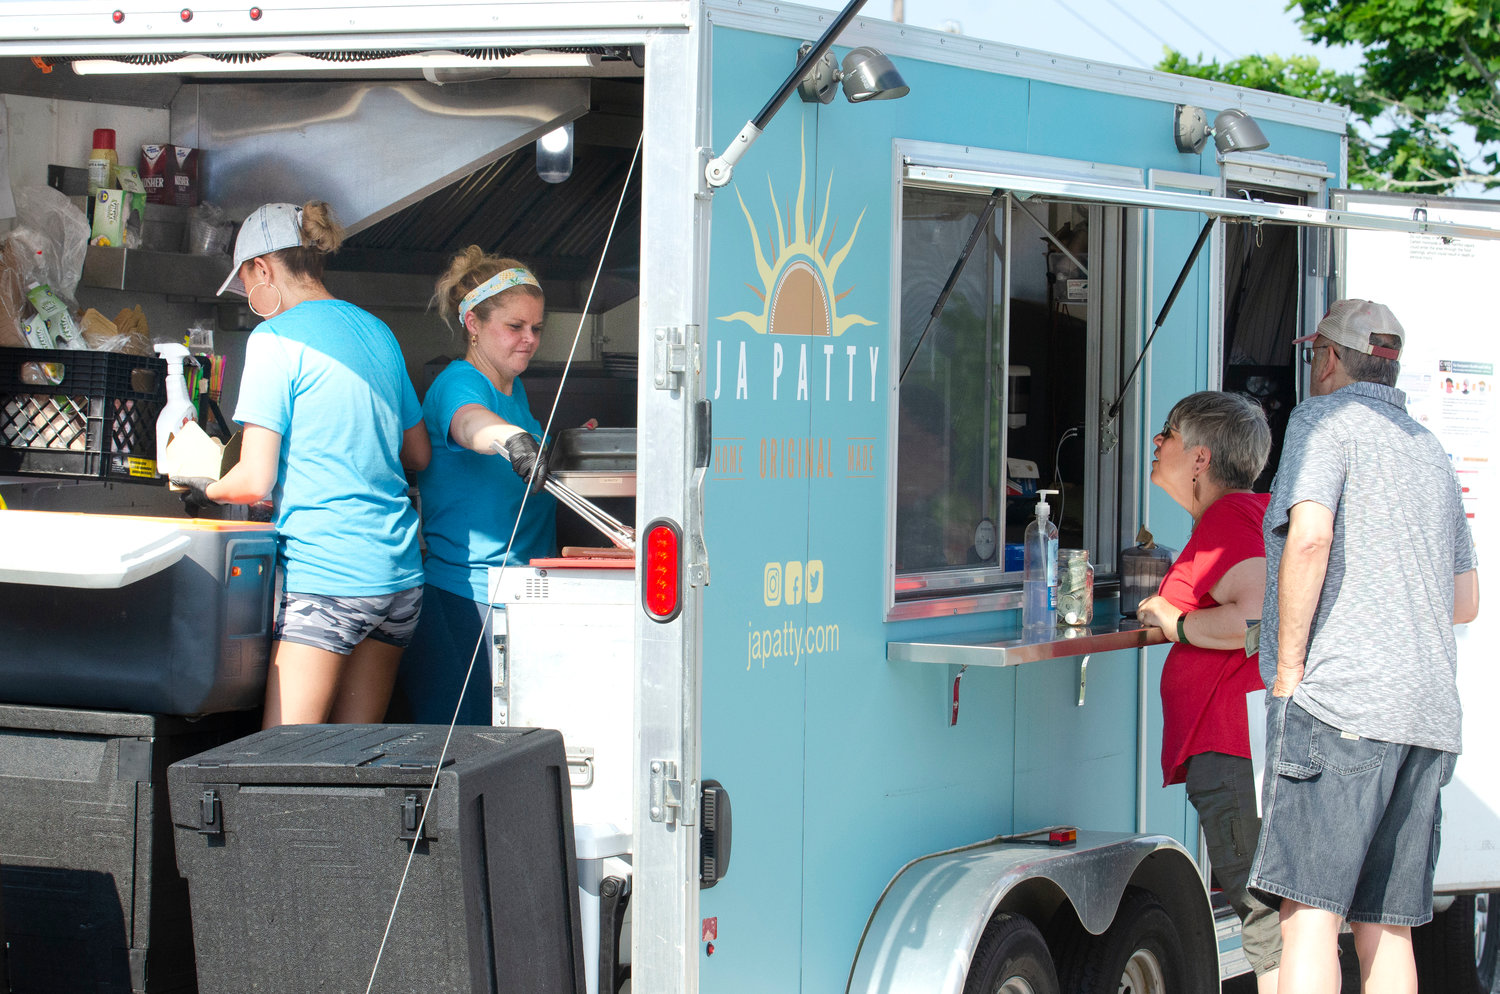 Shannon Cordeiro (left) and Alison Rosario prepare food for Rosario's JA PATTY, a Jamaican-style food truck, while customers Julia Parisi and her husband Ken Highland mull over their order. The community block parties at Police Cove Park will host different food trucks.